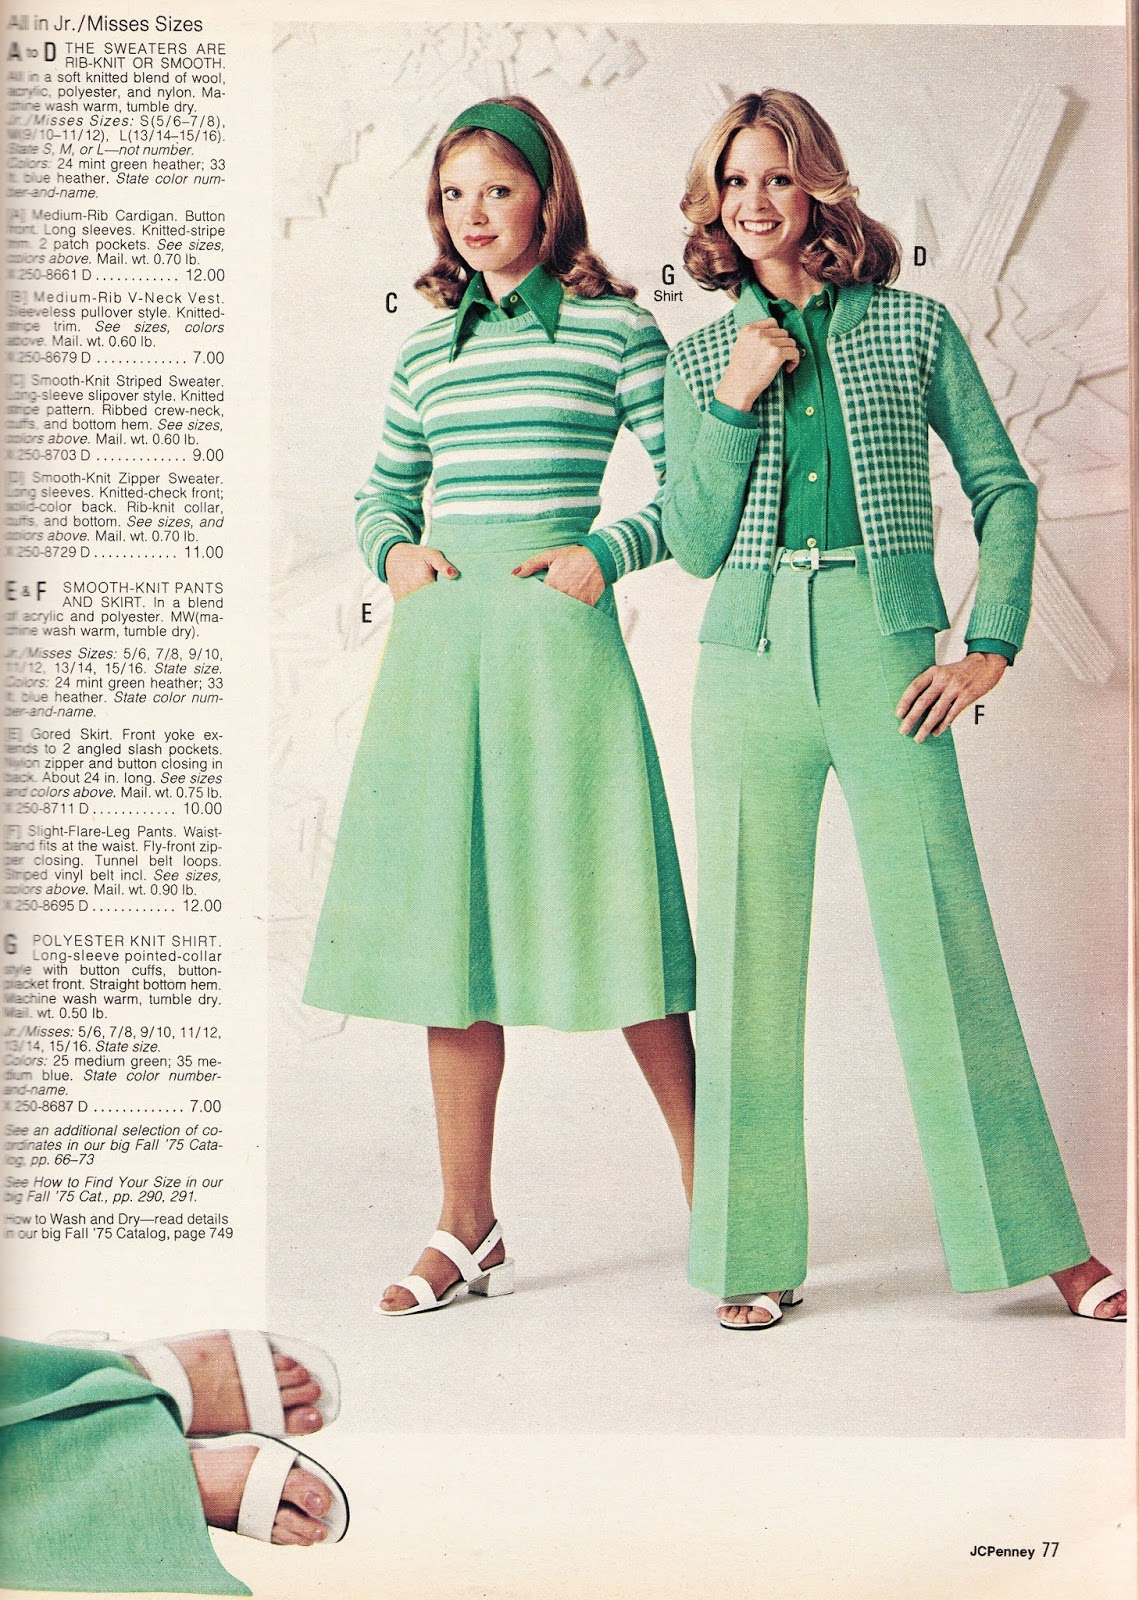 Kathy Loghry Blogspot: That's So 70s: Christmas Time is Sweater Time!